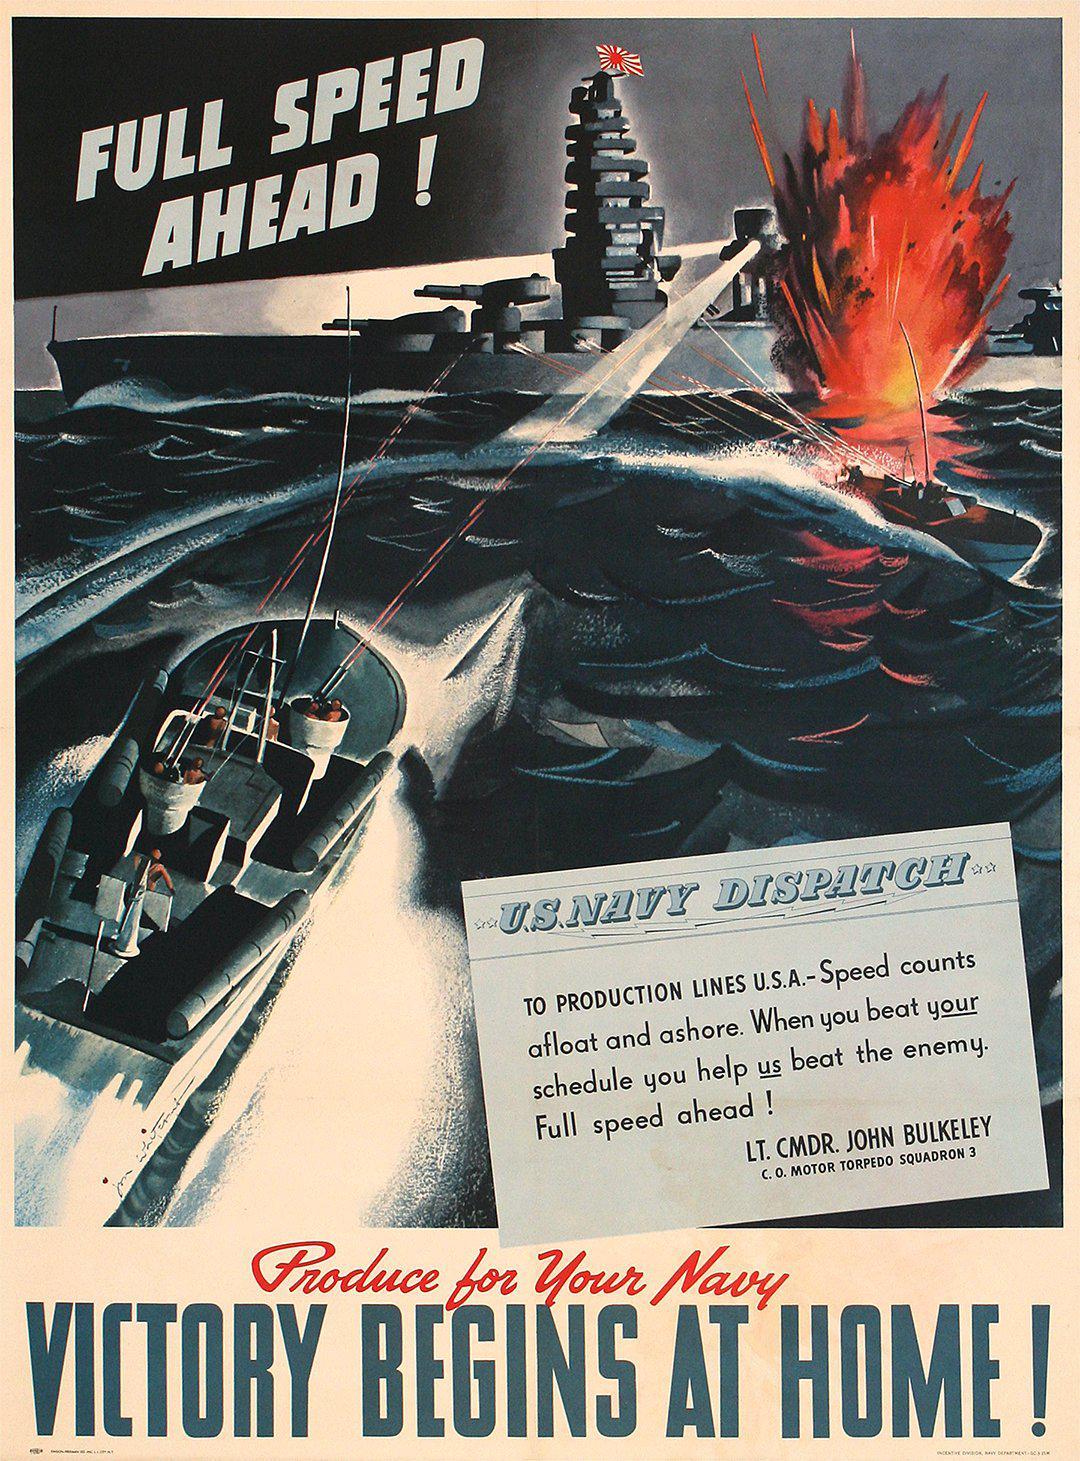 Original Vintage WWII Poster Victory Begins at Home - Full Speed Ahead Navy by Jon Whitcomb